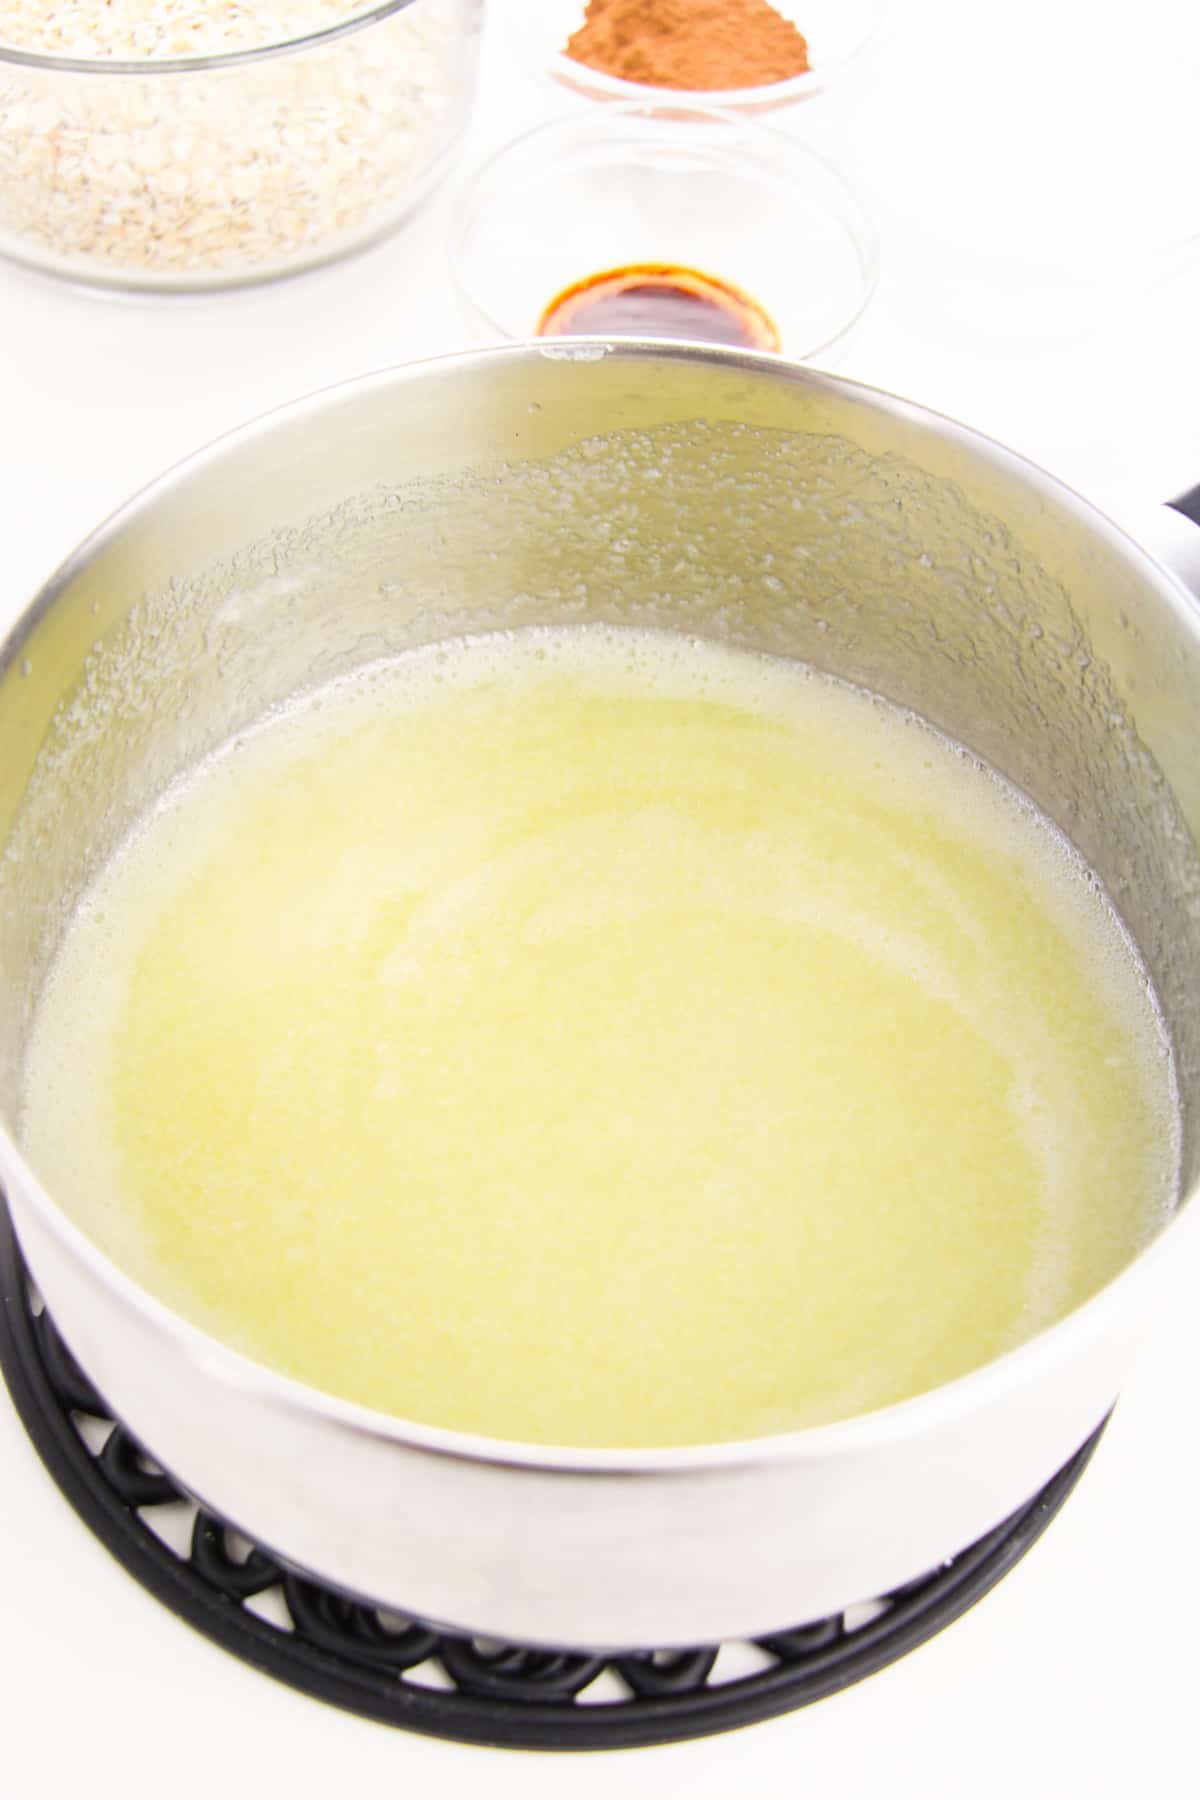 Butter, milk, and white sugar in saucepan with additional ingredients in background